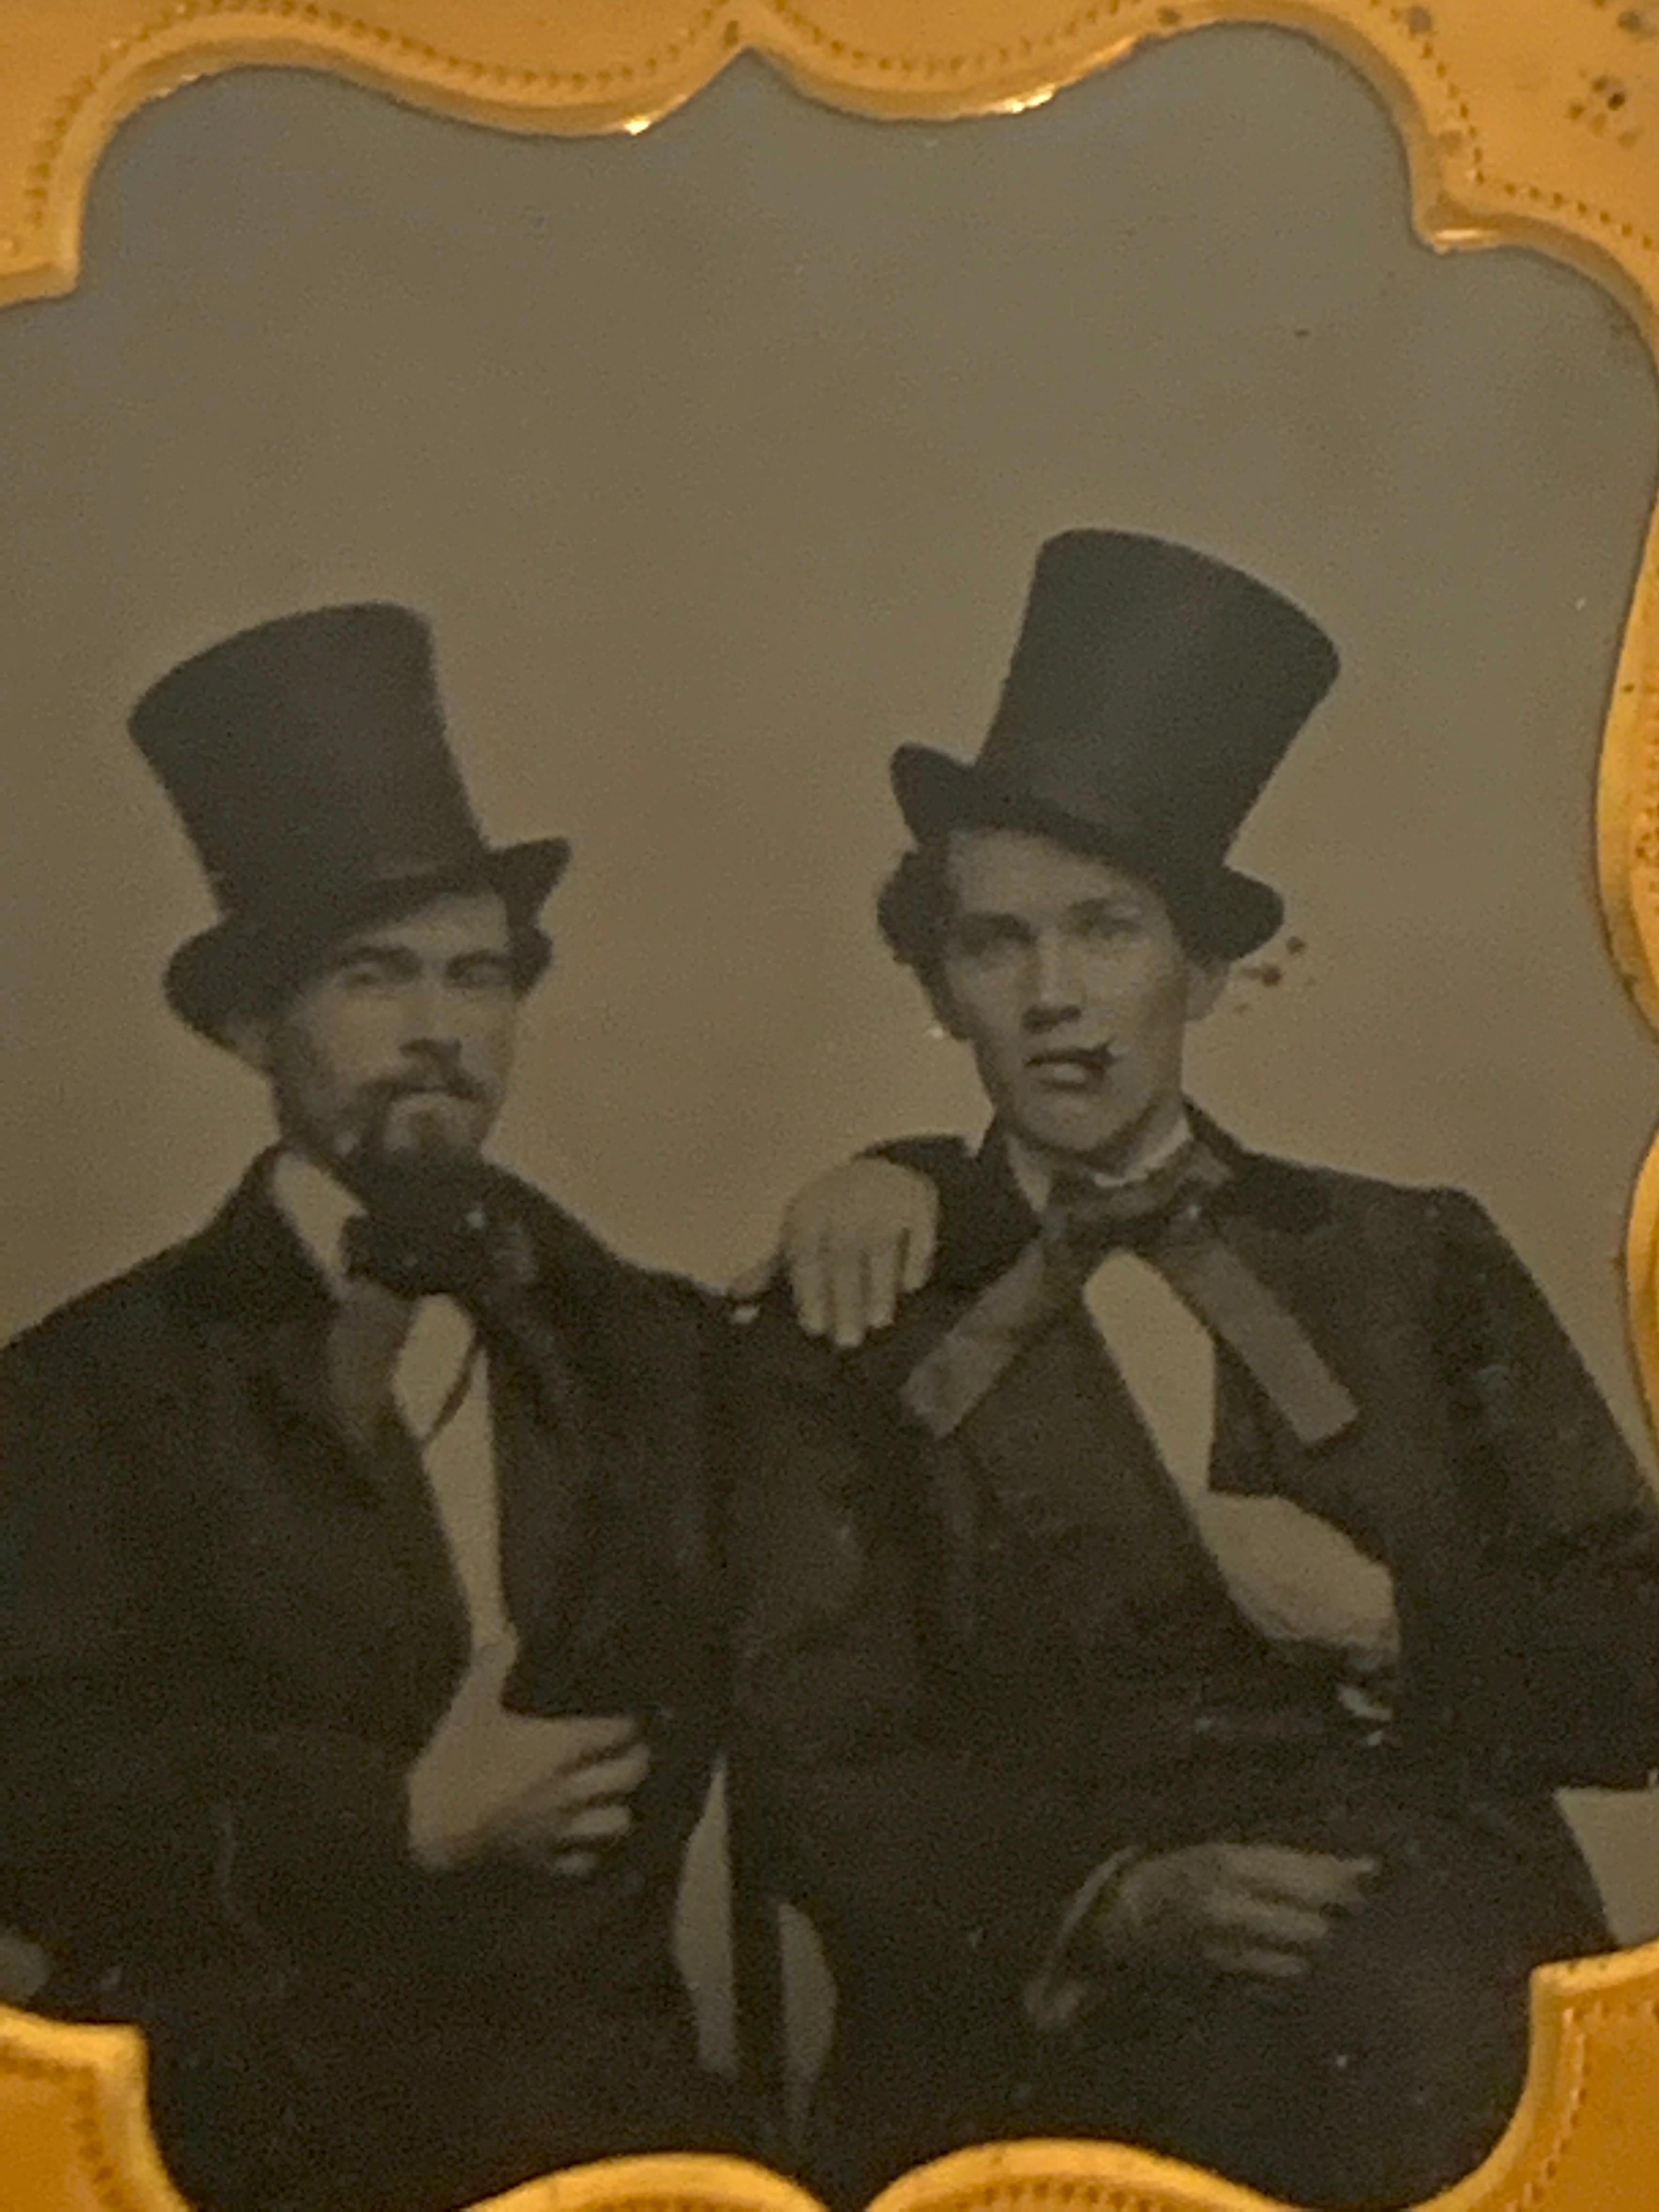 Daguerreotype Portrait of Two Men Embracing, Smoking with Ties and Top Hats For Sale 2